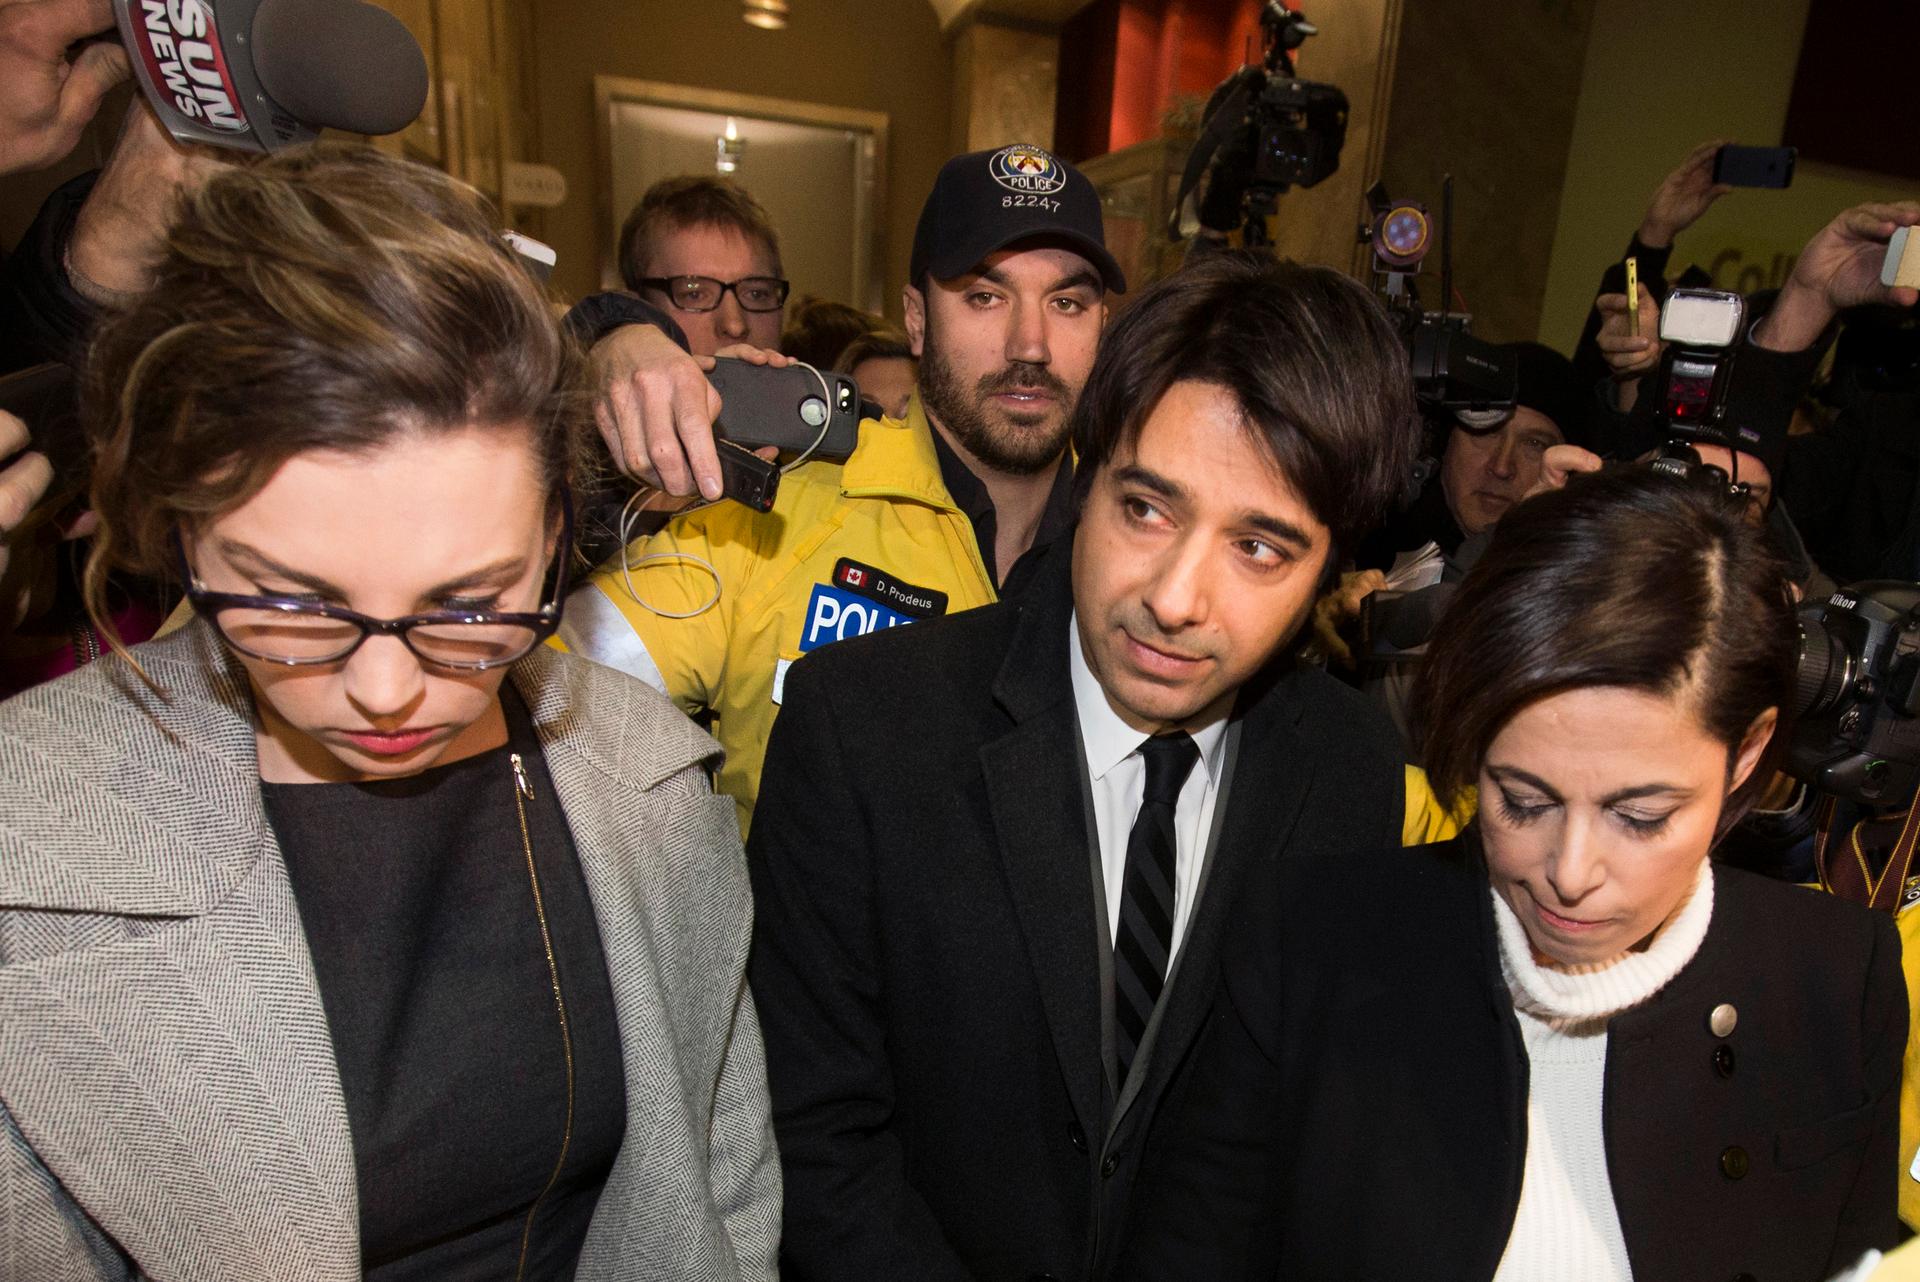 A Canadian radio talk show program is relaunching following the firing of former host Hian Ghomeshi, center, who is facing charges of harassment. 